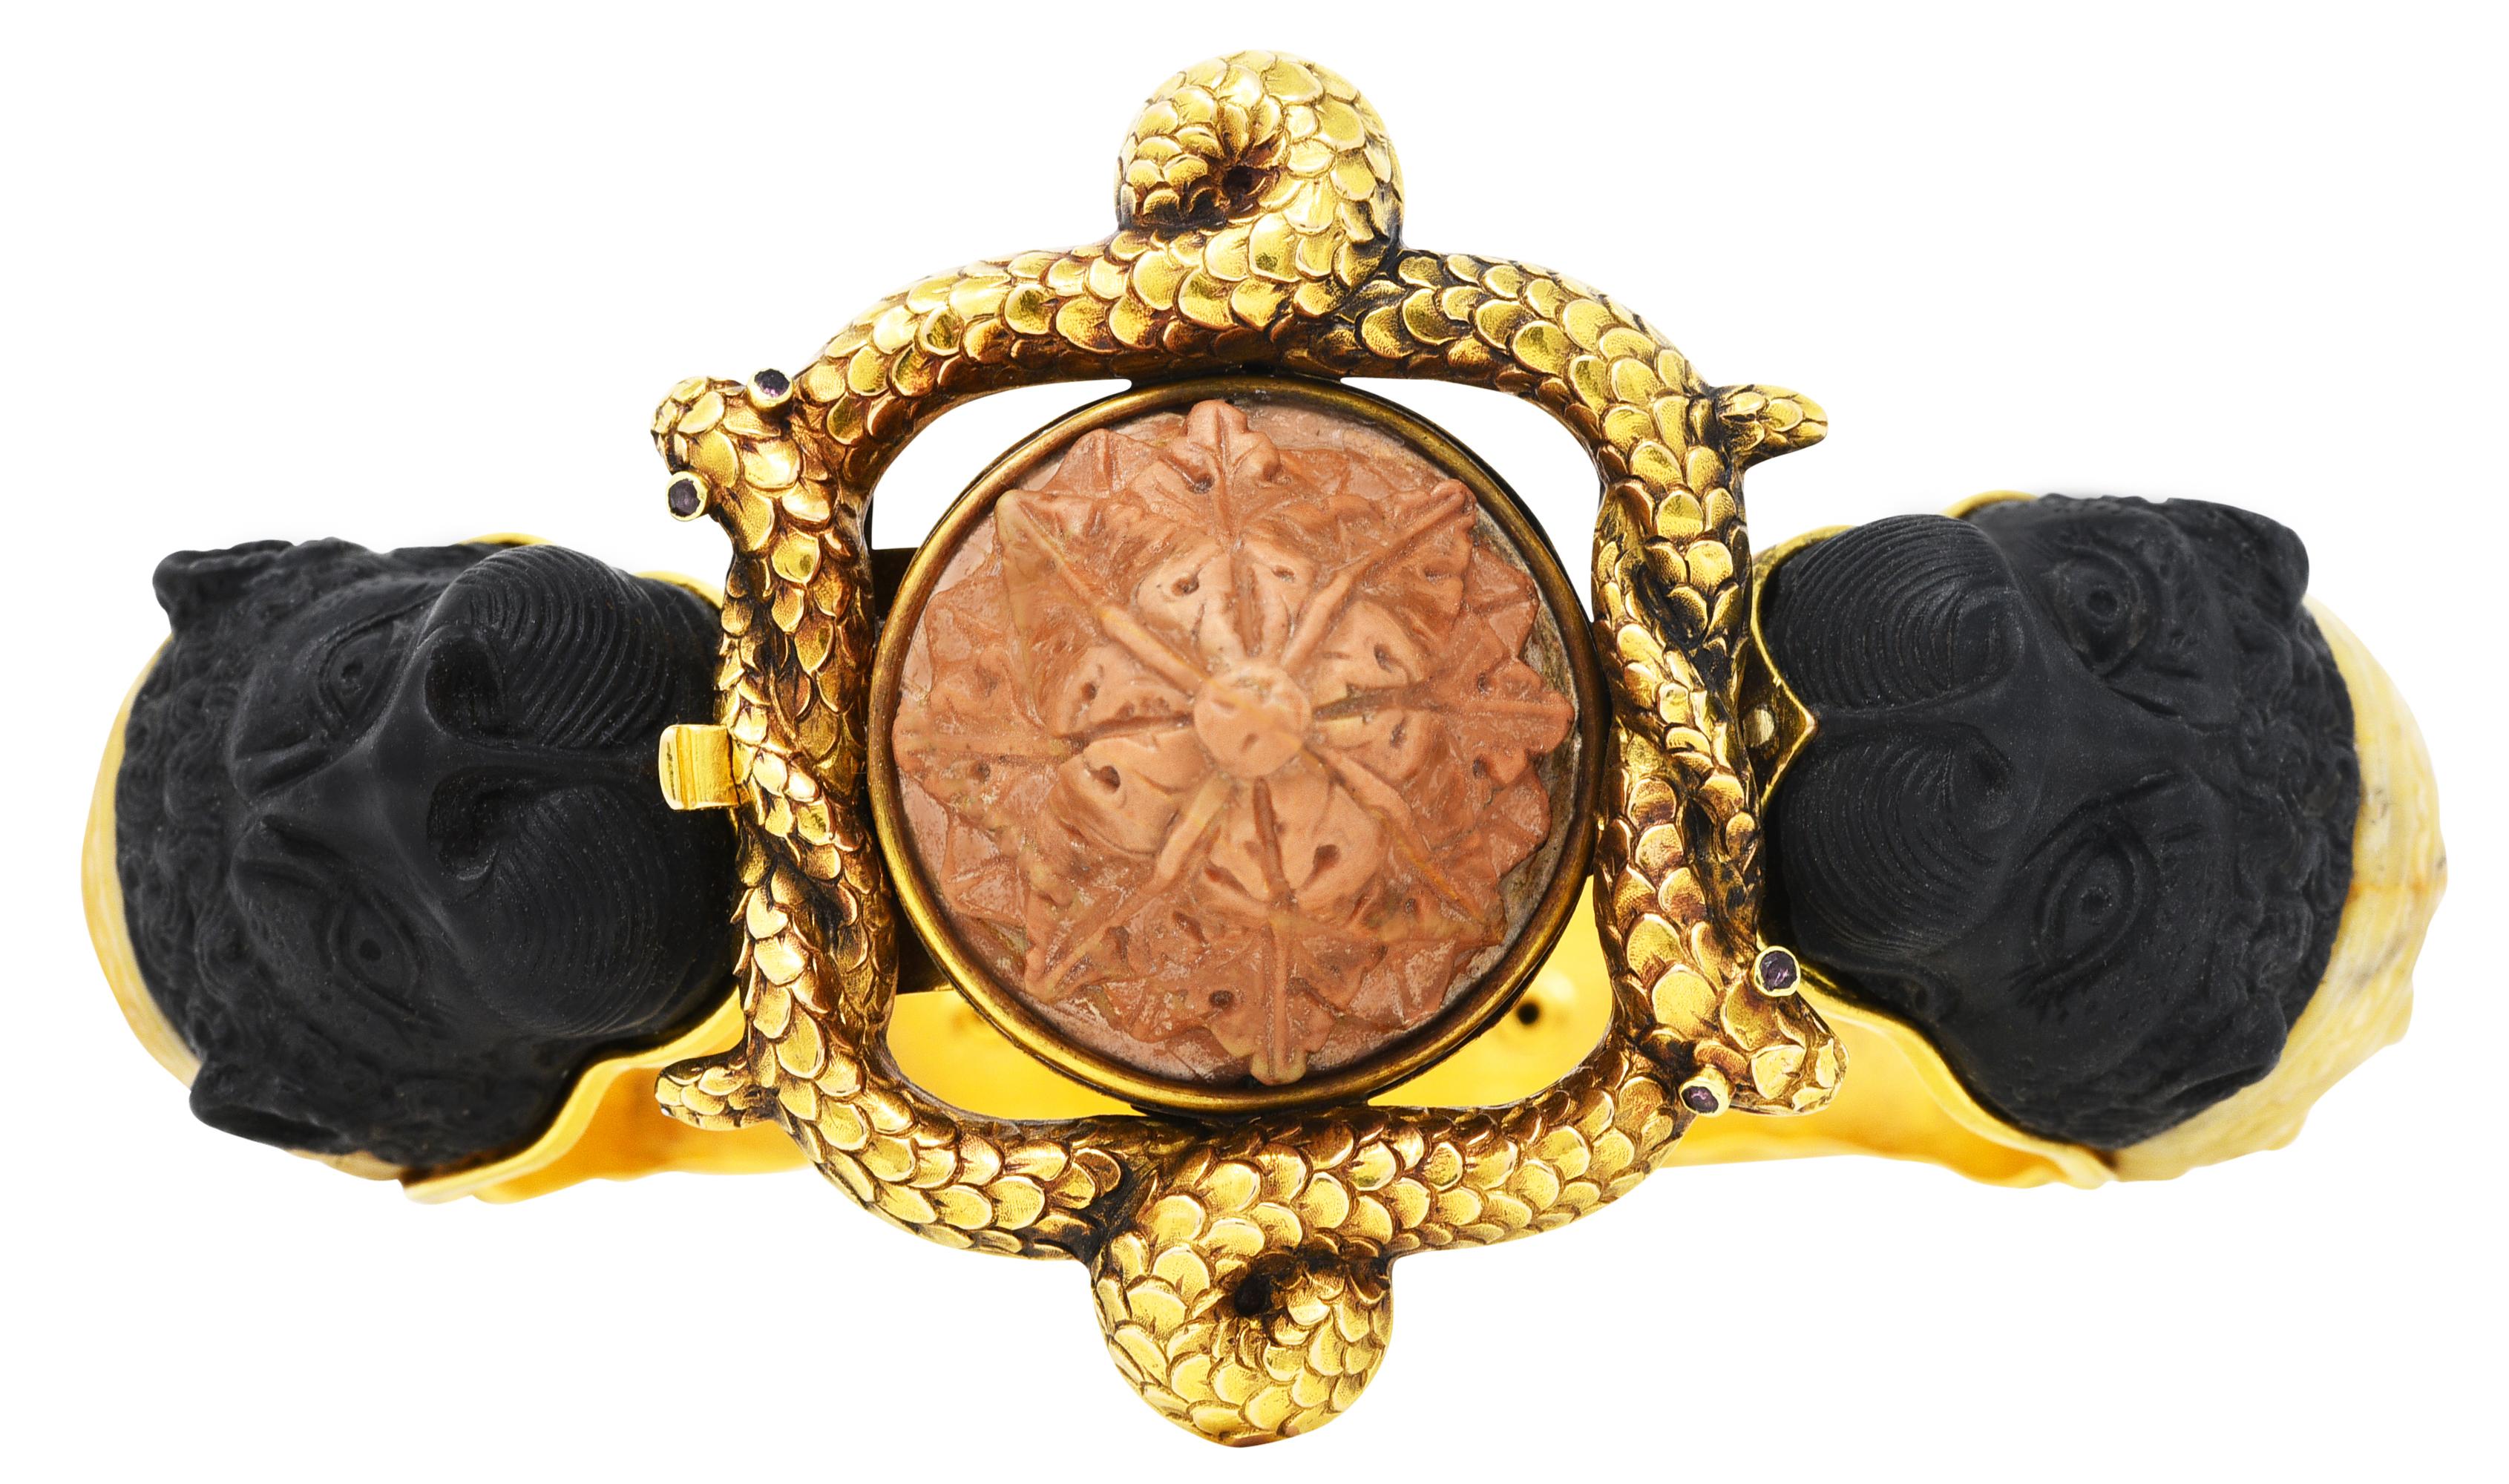 Hinged bangle bracelet features an ornately rendered snake love knot station

Eyes are bezel set with round cut and strongly purplish red gemstones

Centering pyramidal vegetable ivory deeply carved as foliate - opaque and light brown

Shoulders are